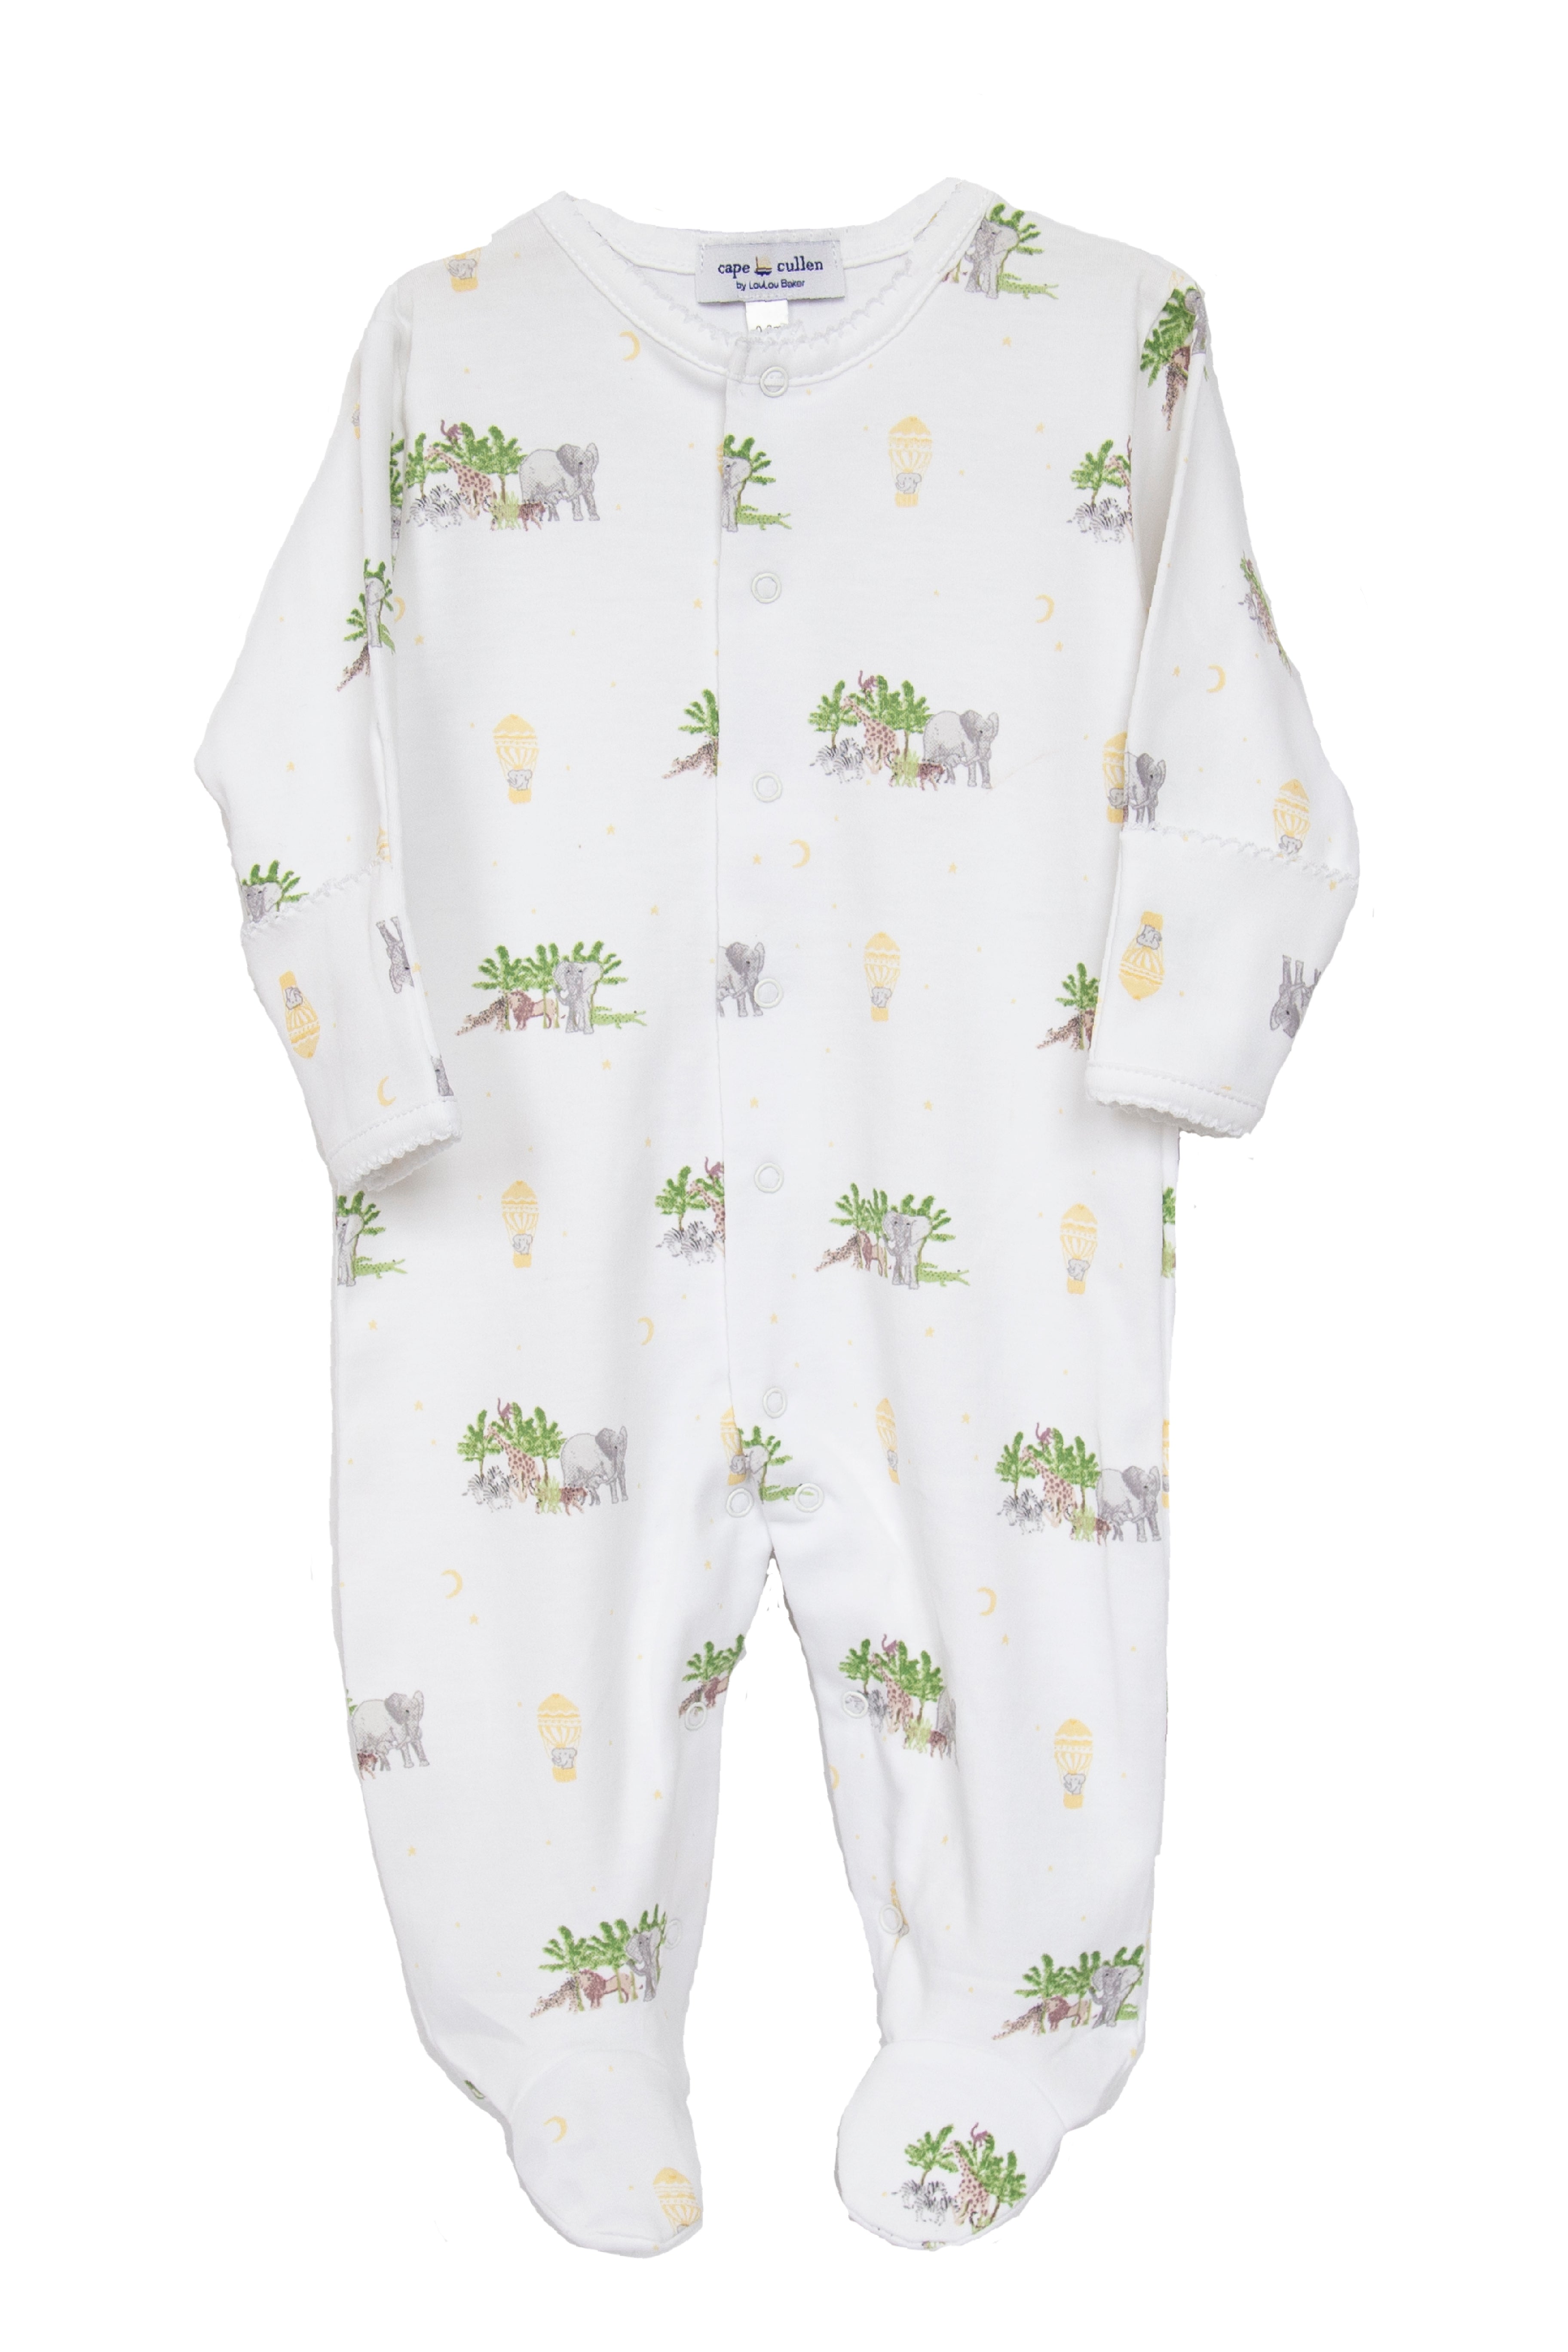 Out of Africa Print Footie